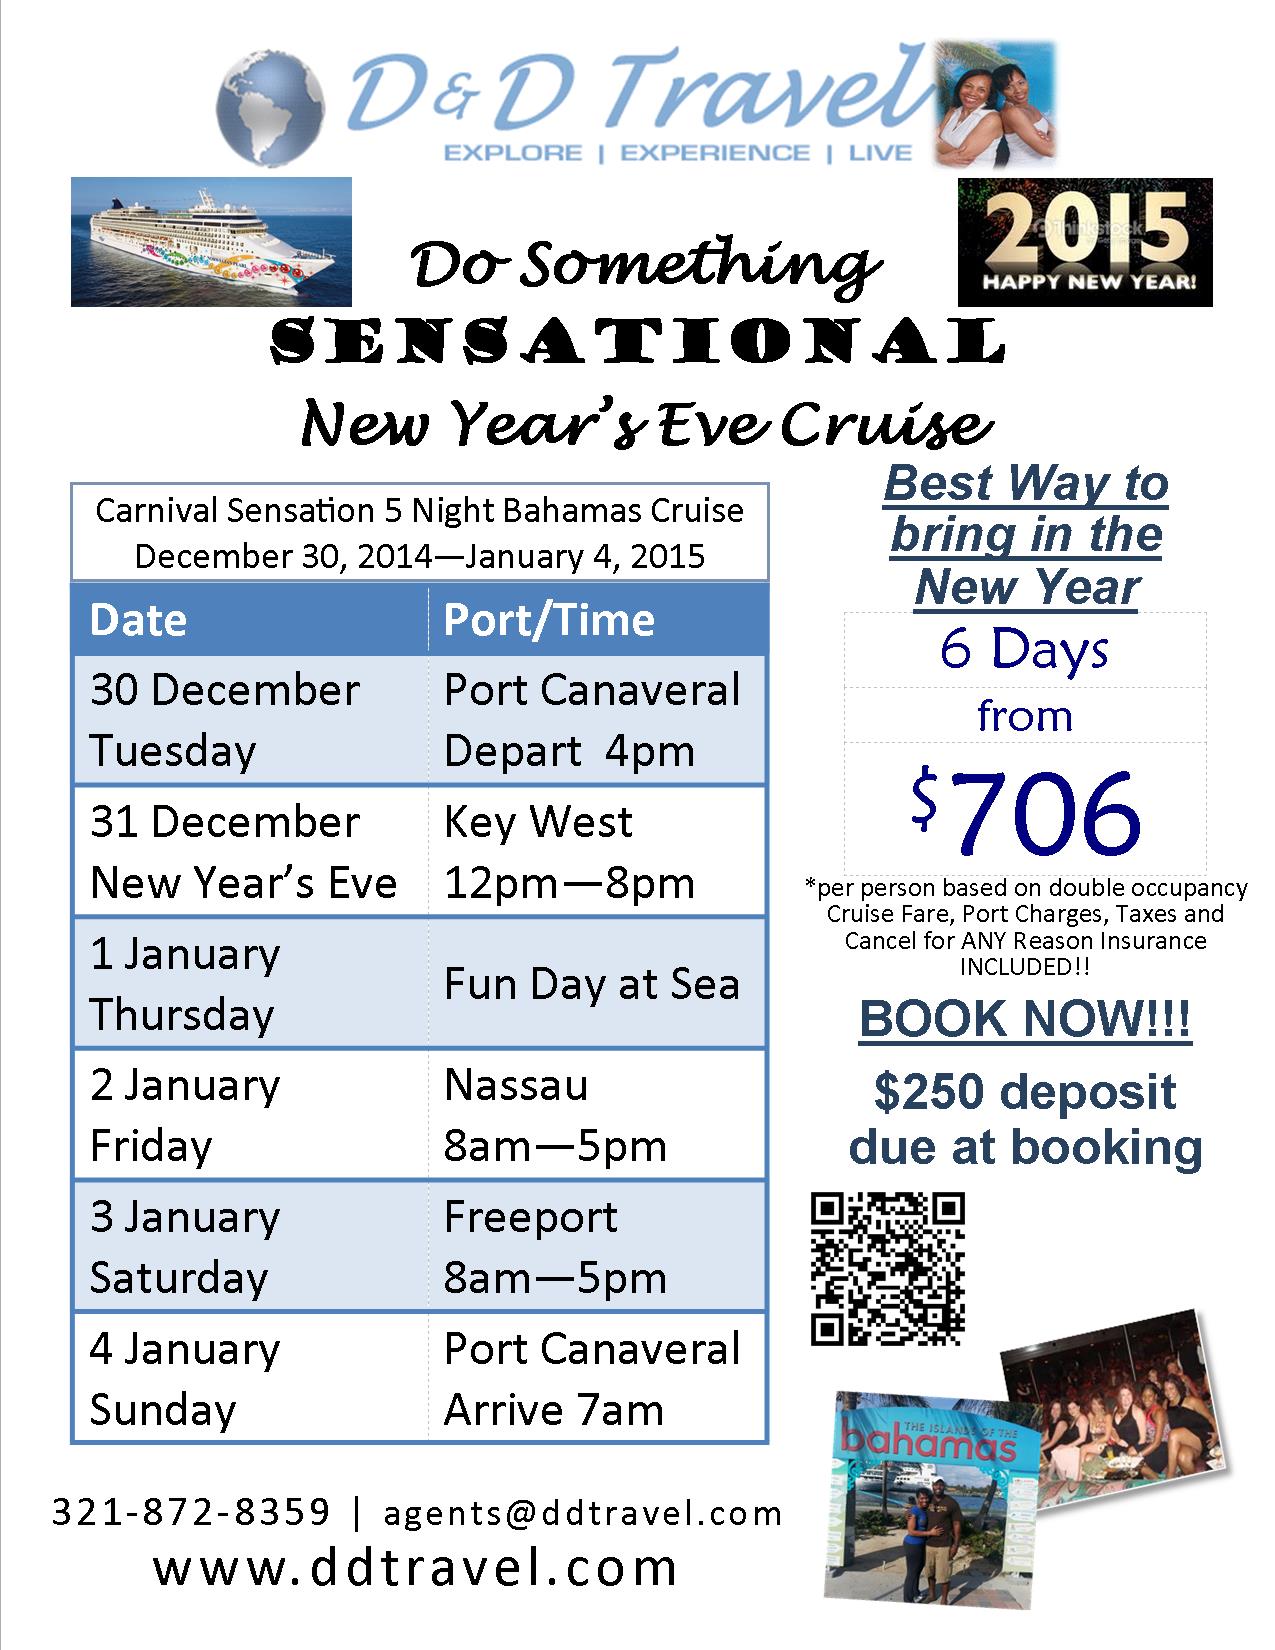 New Year's Eve 2015 from $706